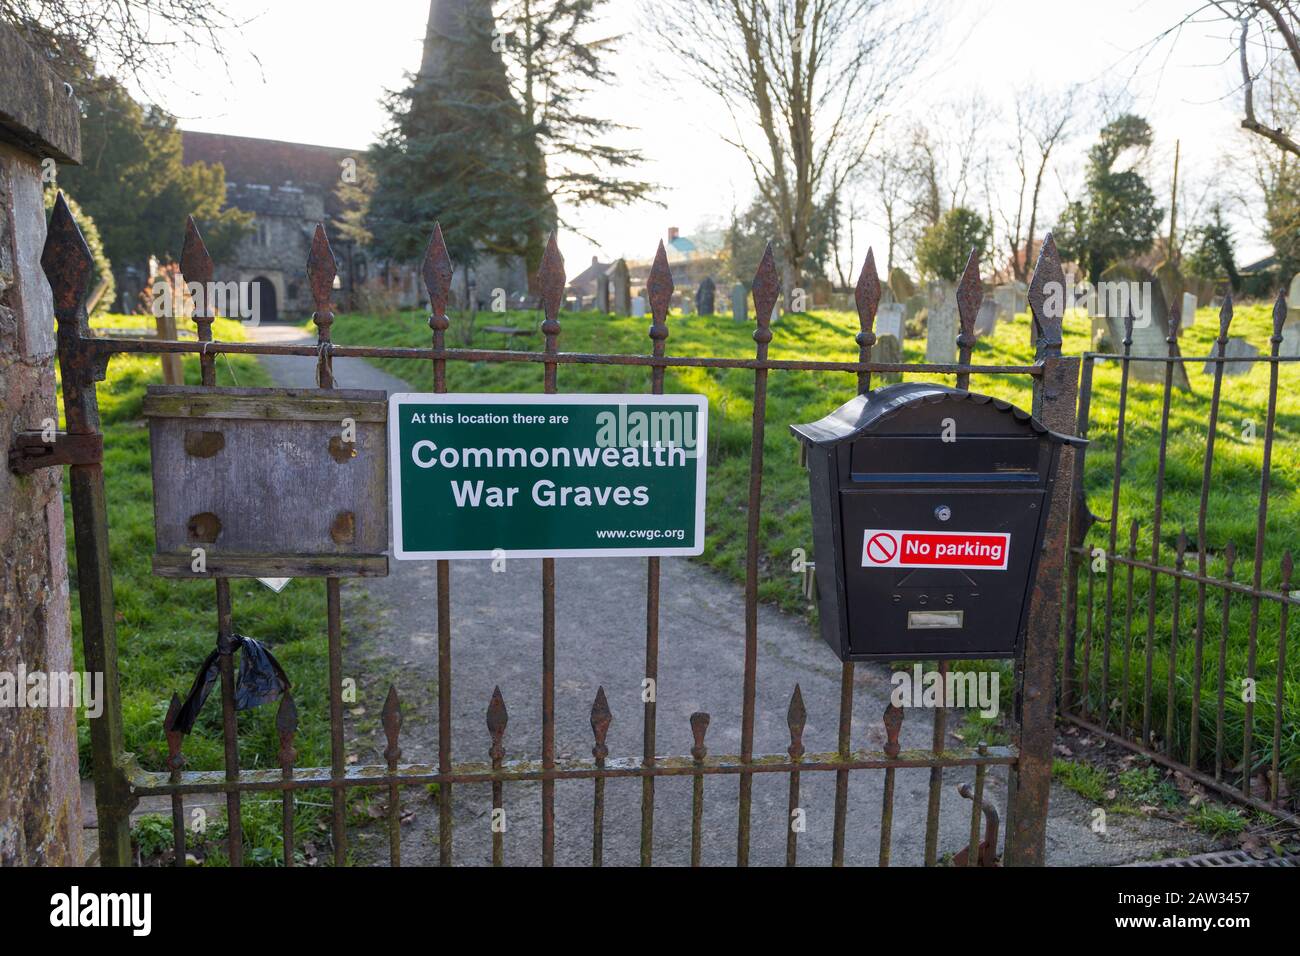 Sign for commonwealth war graves, woodchurch, kent, uk Stock Photo